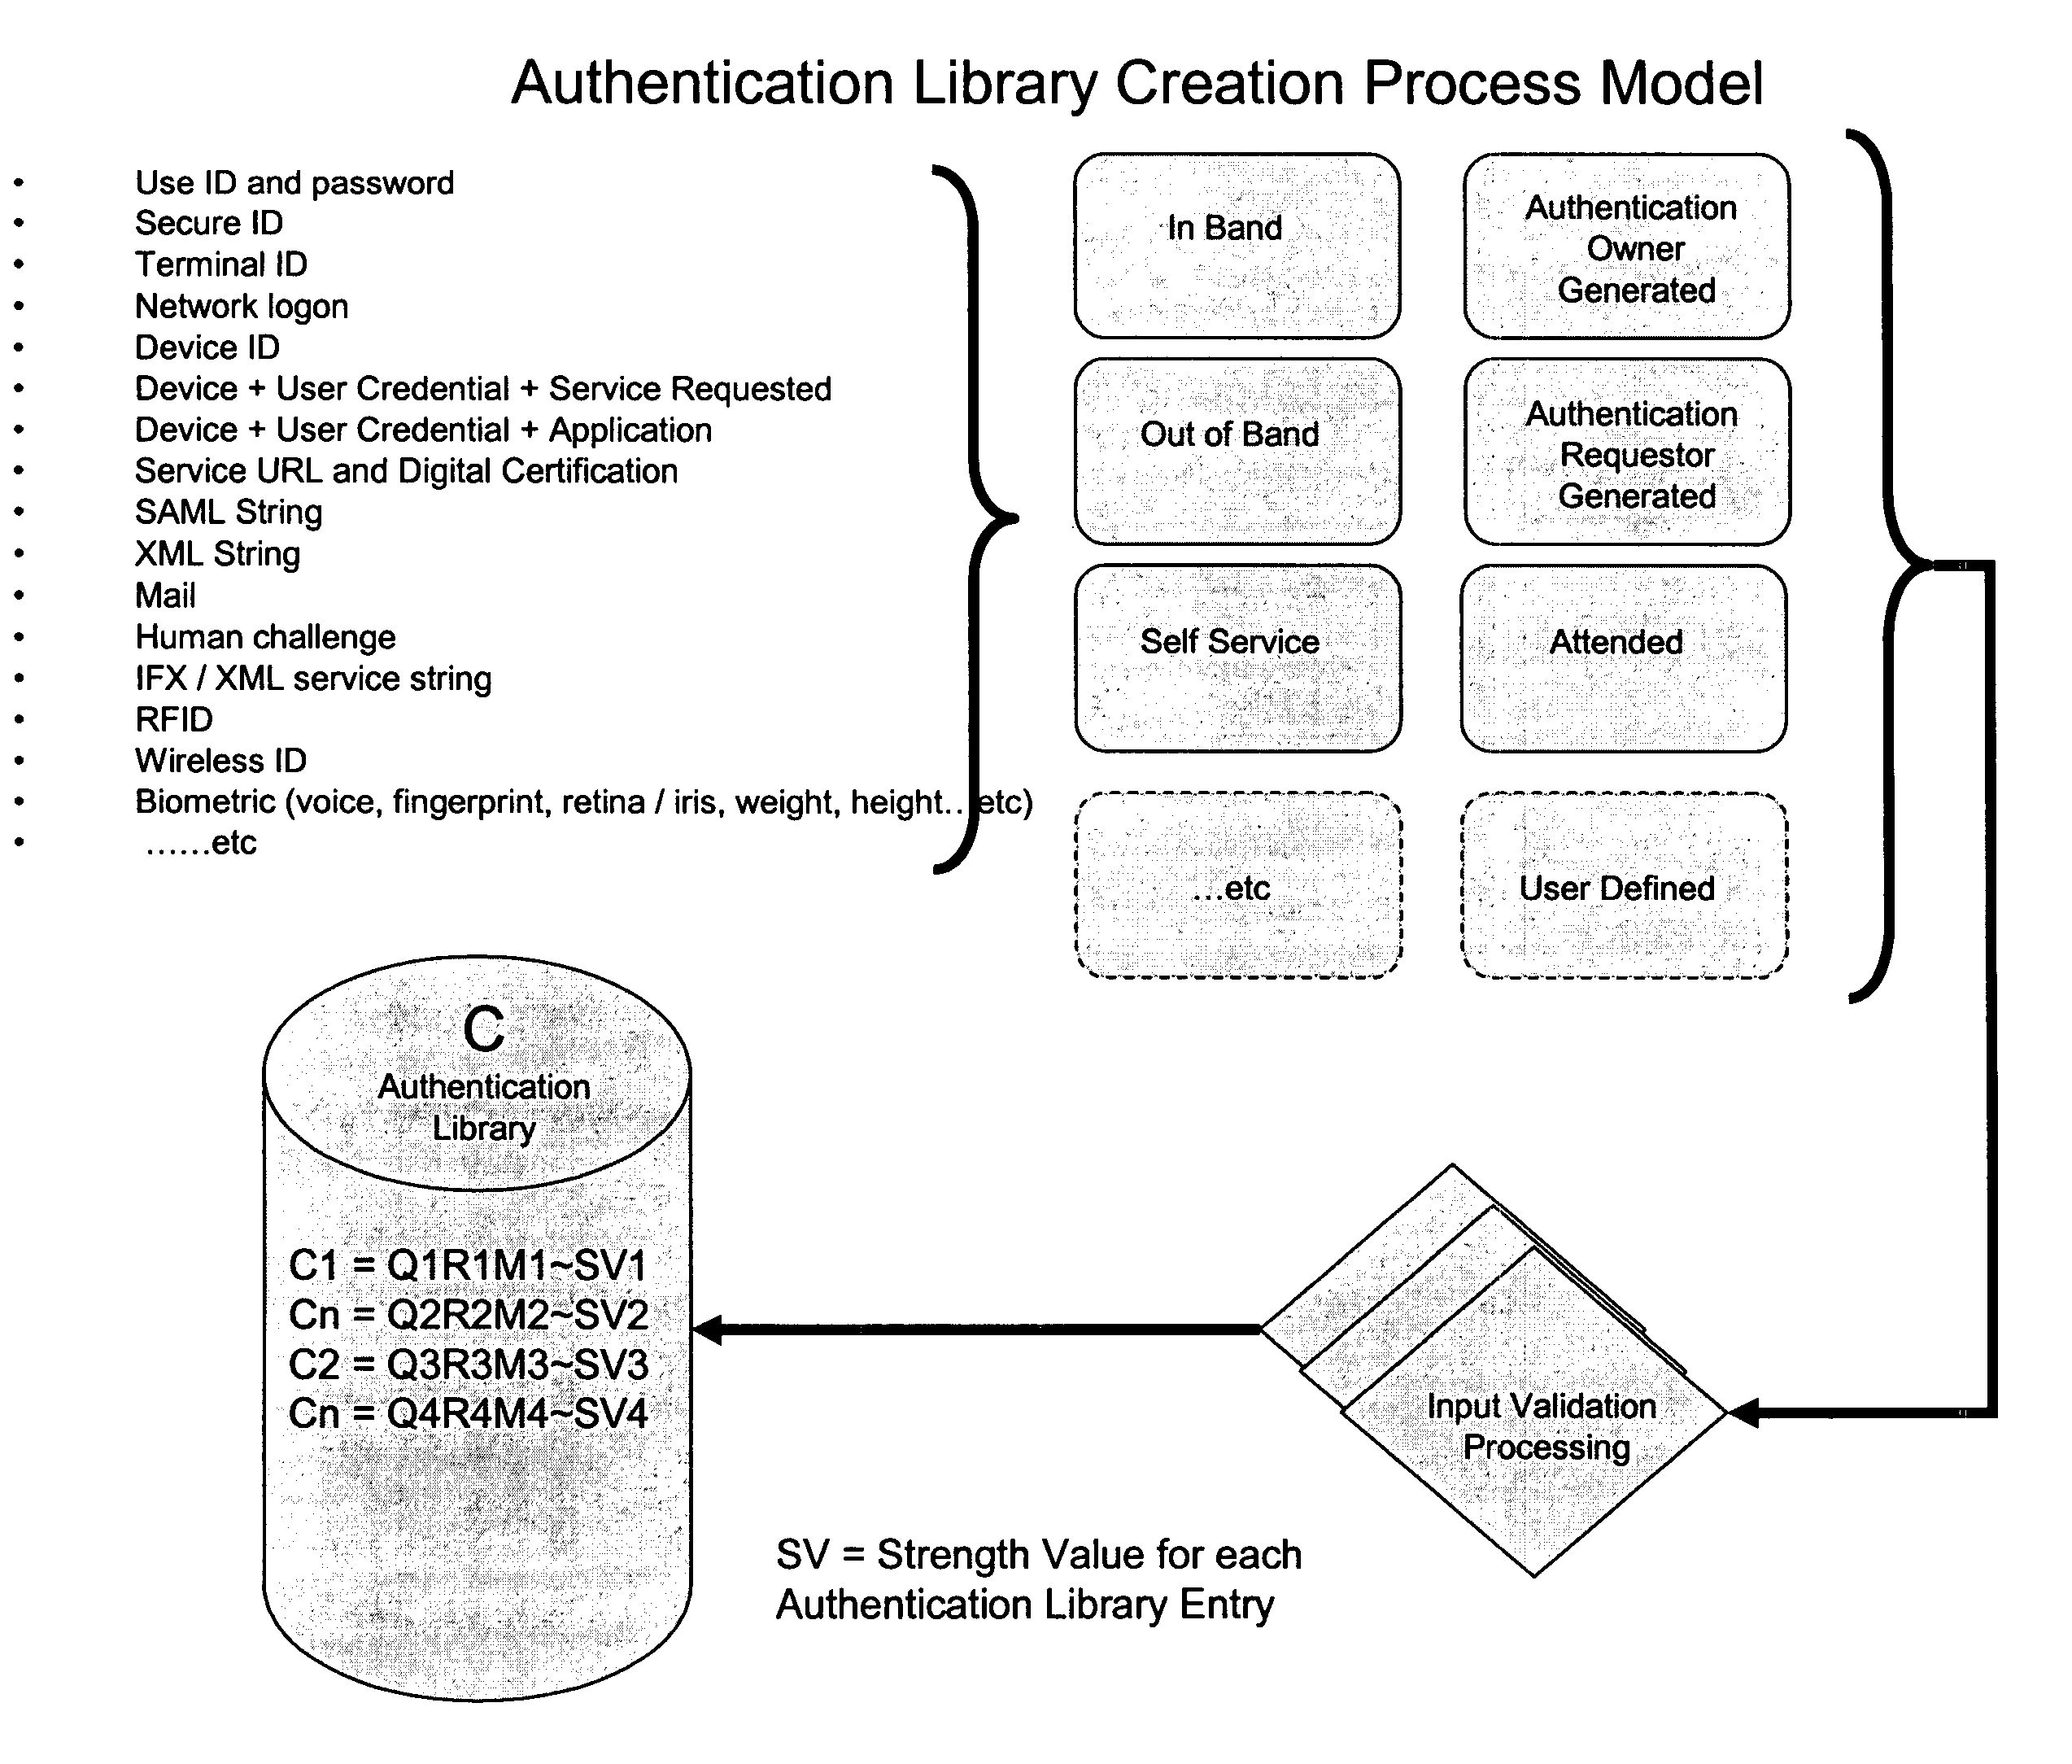 Common authentication service for network connected applications, devices, users, and web services